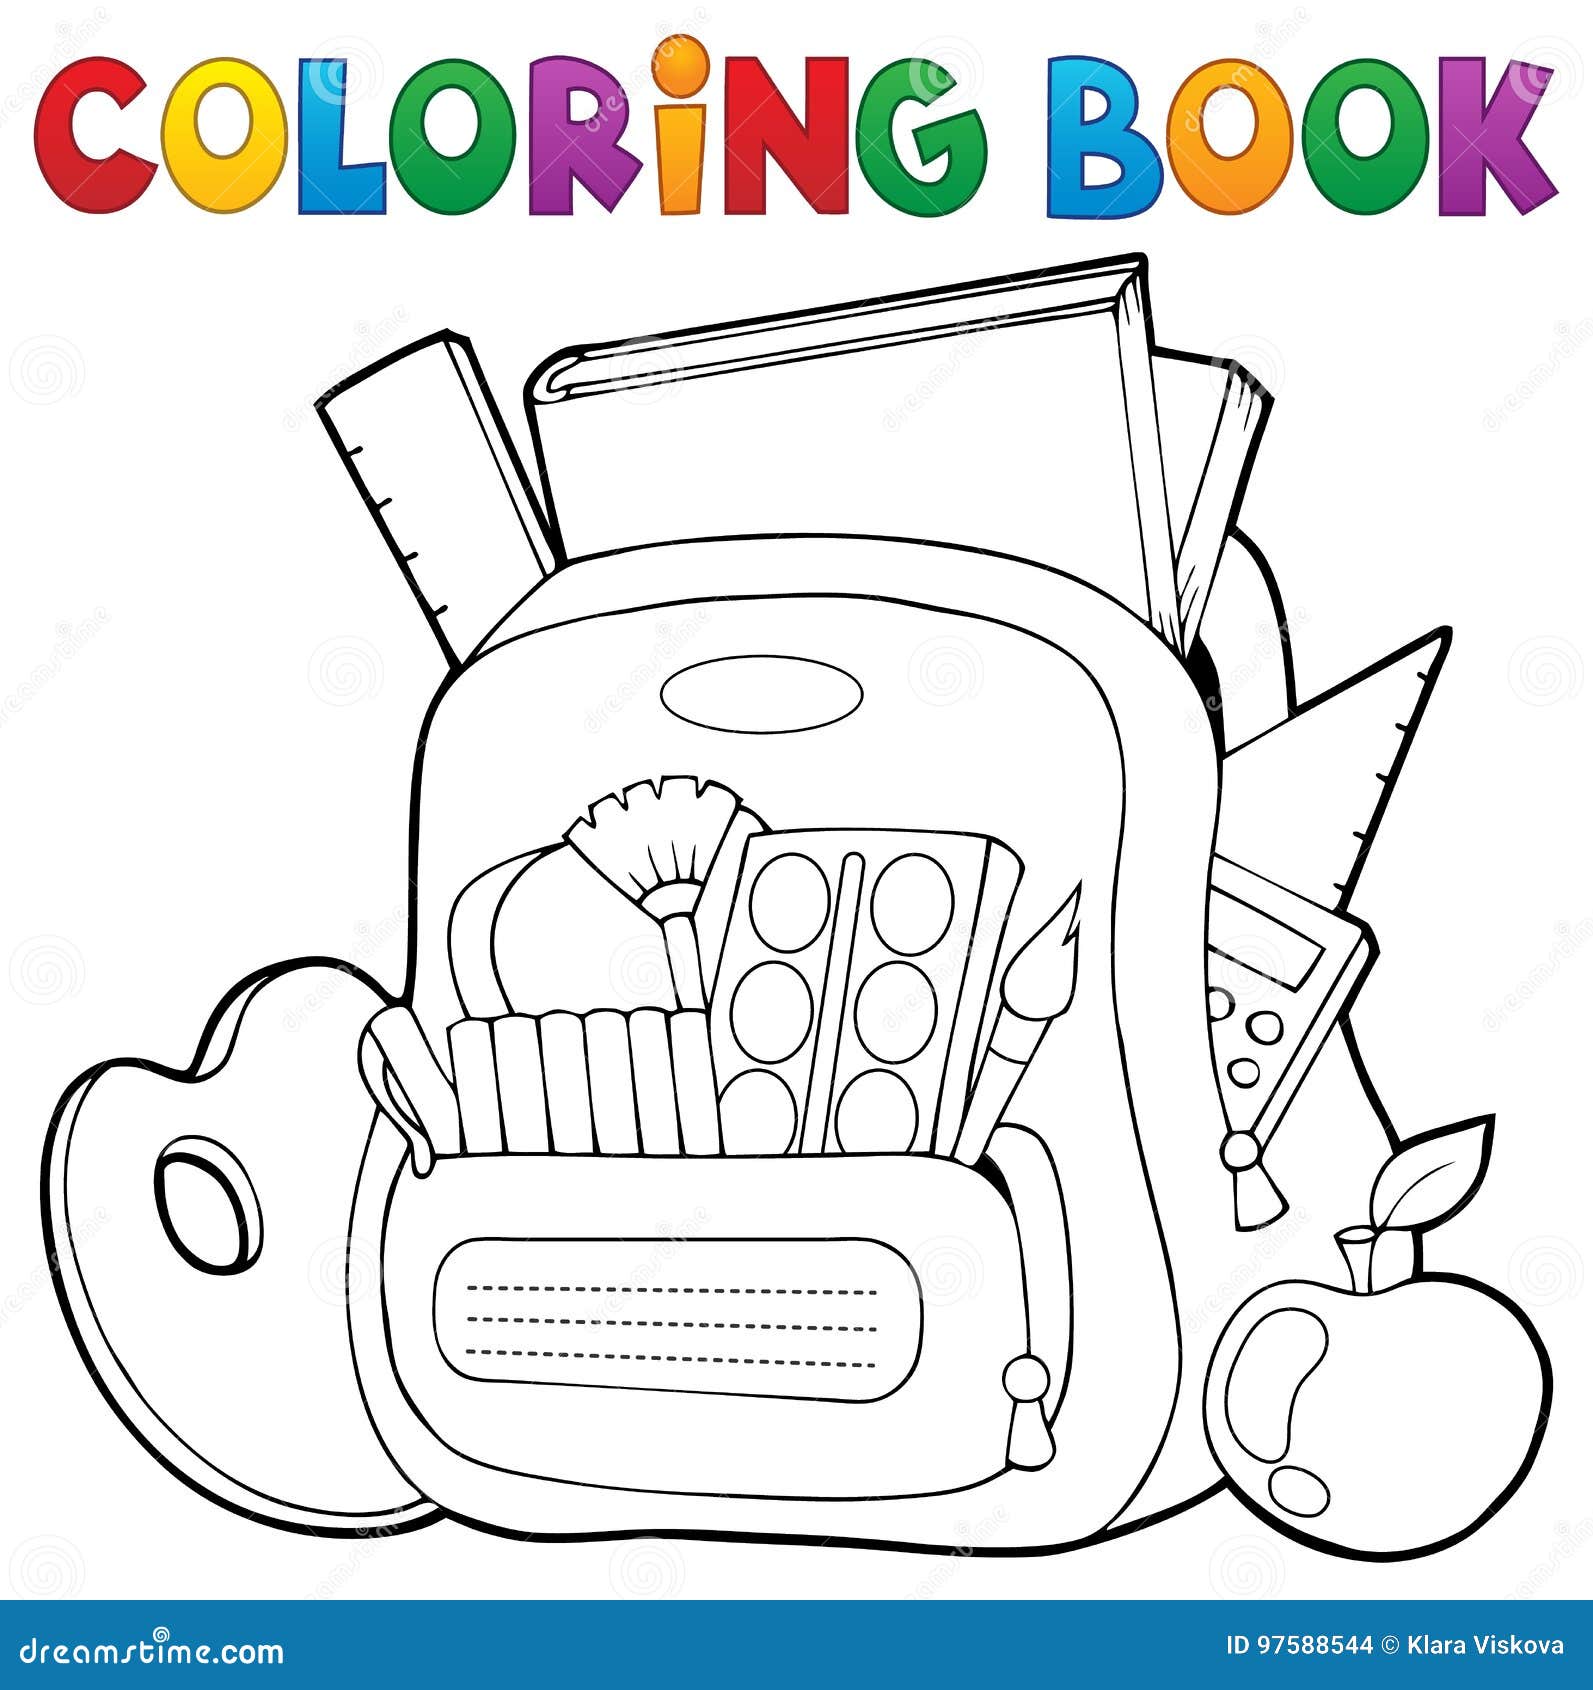 Backpack coloring page | Free Printable Coloring Pages